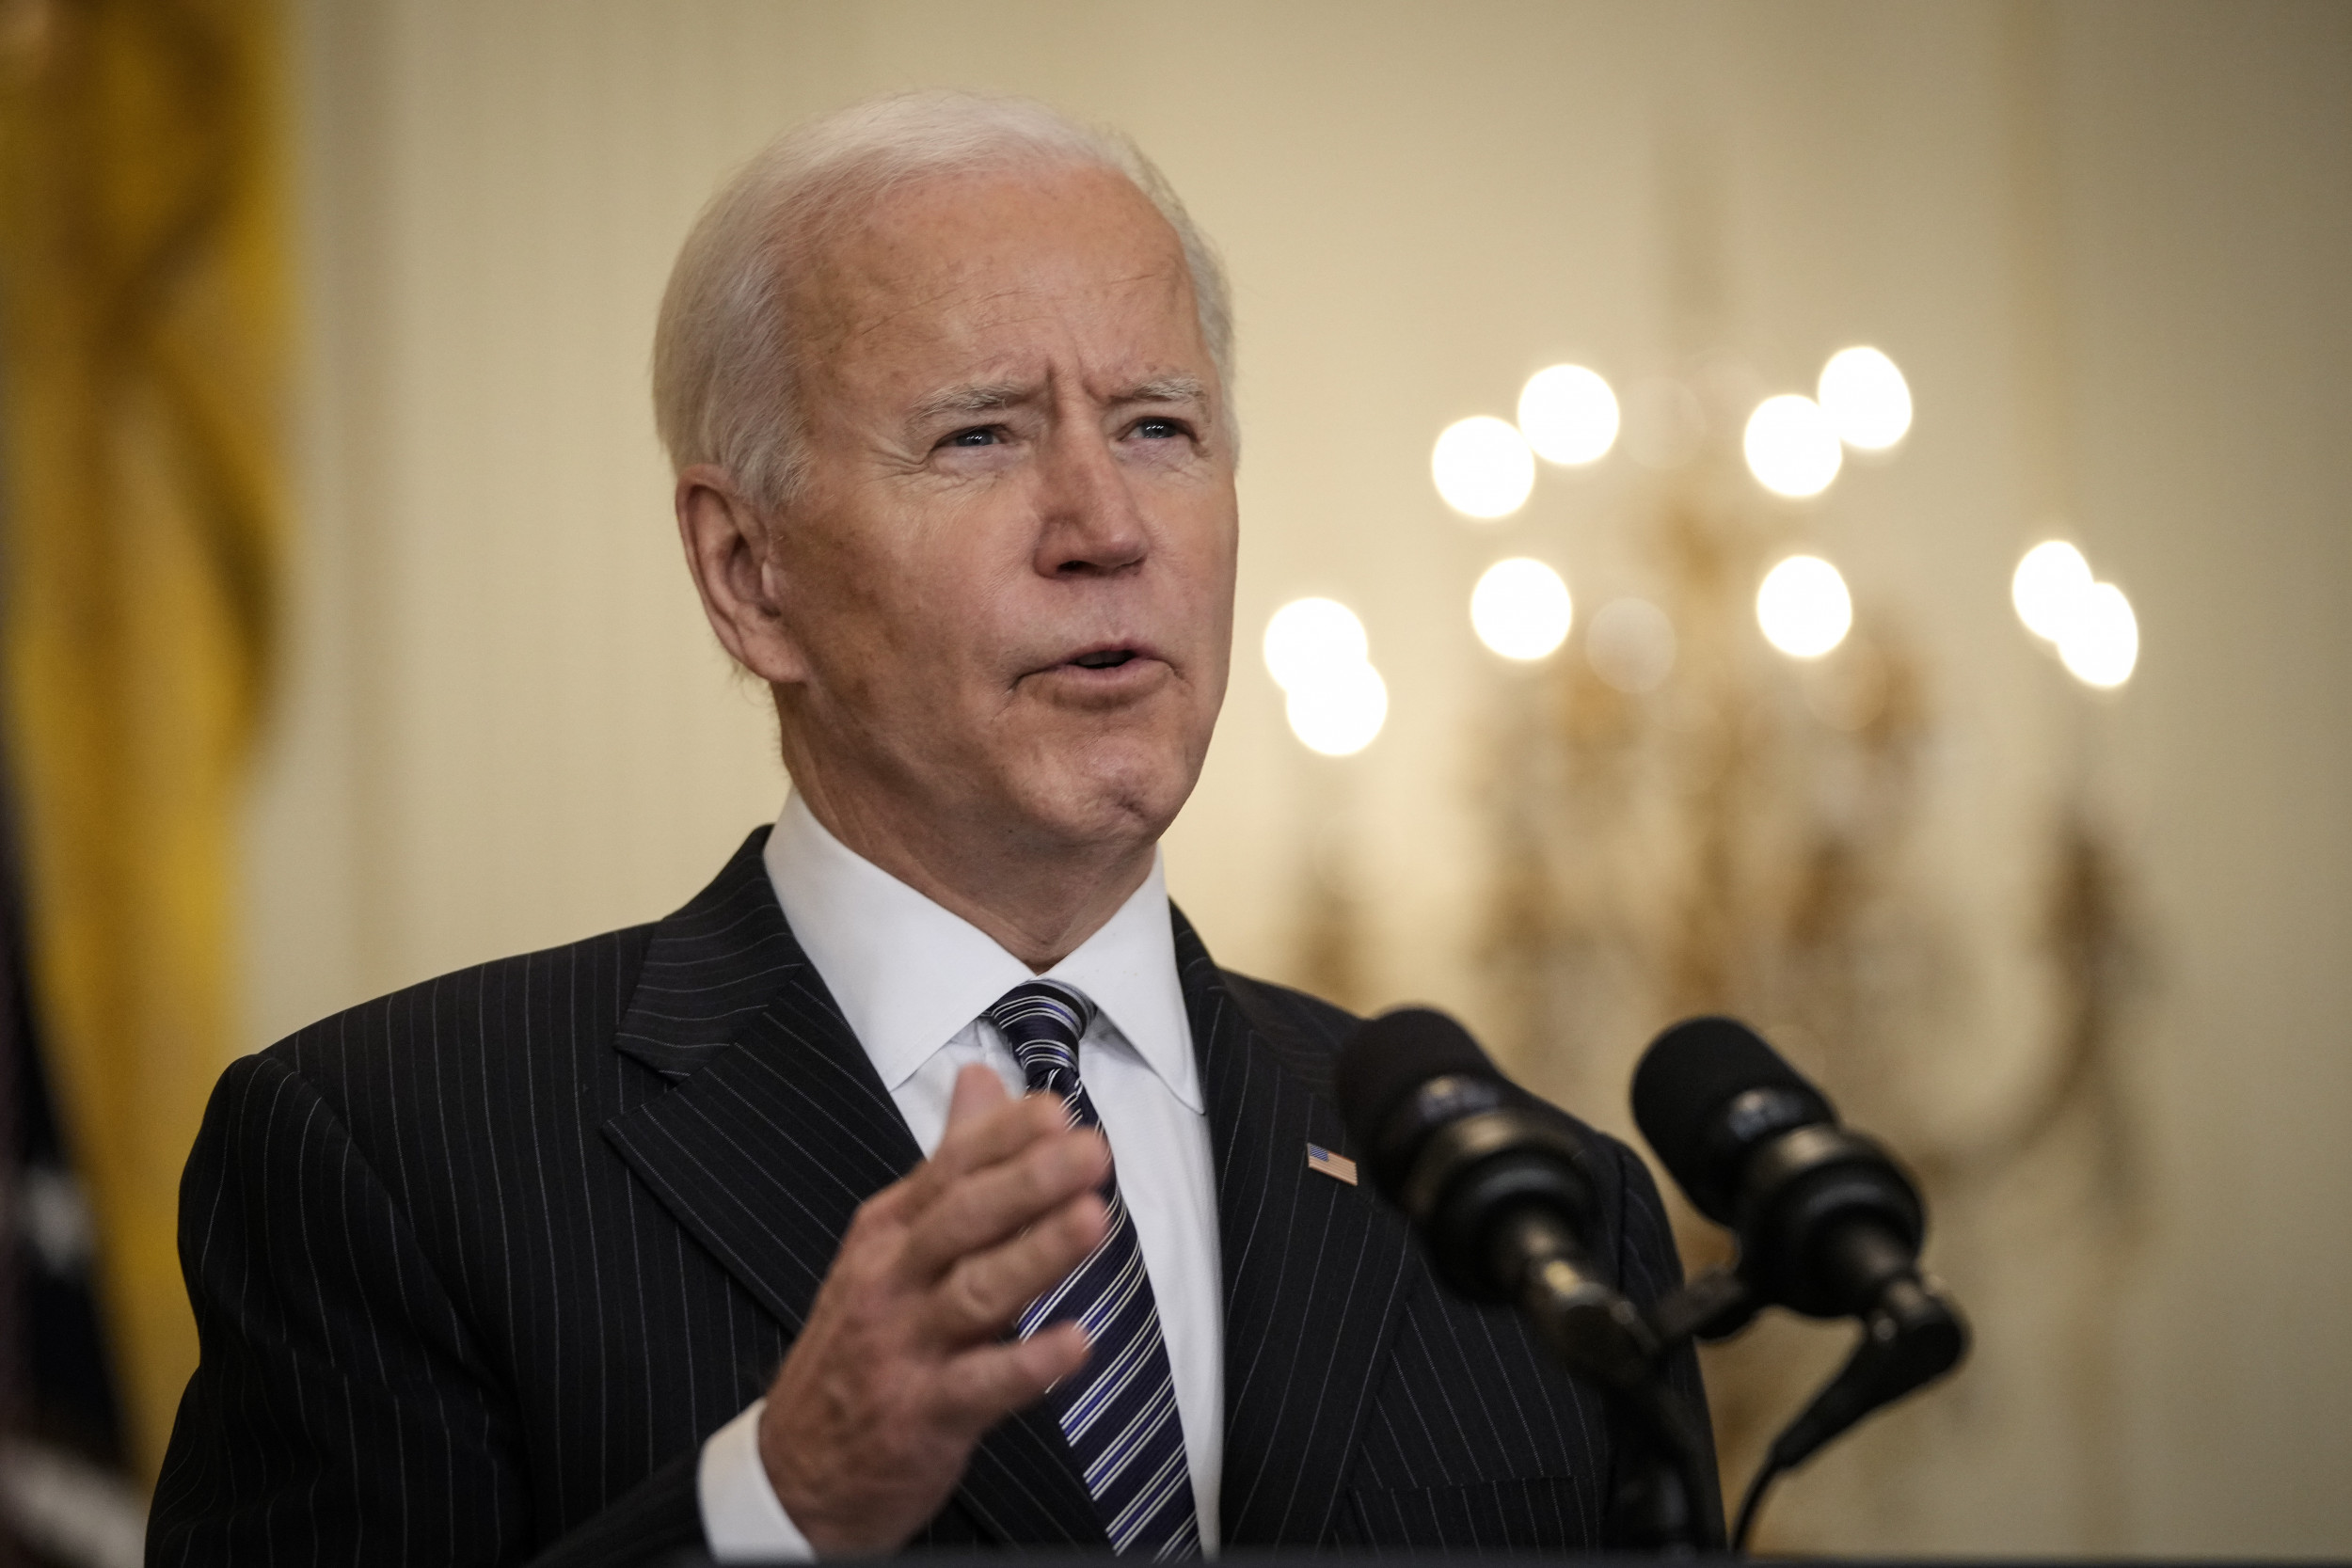 How popular is Joe Biden?  Stimulus check deposits coincide with the increase in the approval rating